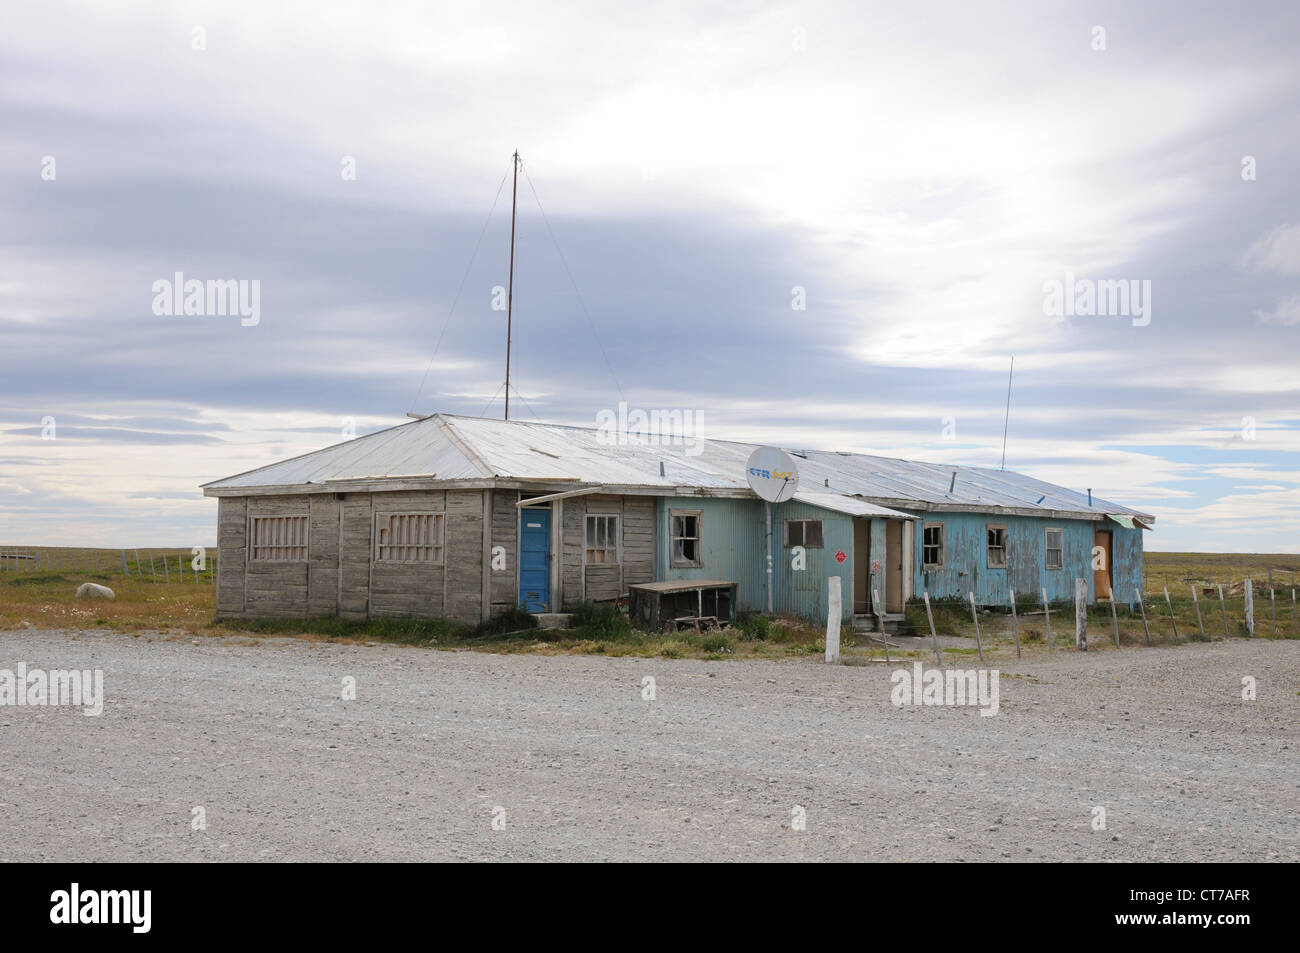 Dilapidated hut, tin and wood office building, remote landscape, Patagonia, Chile Stock Photo